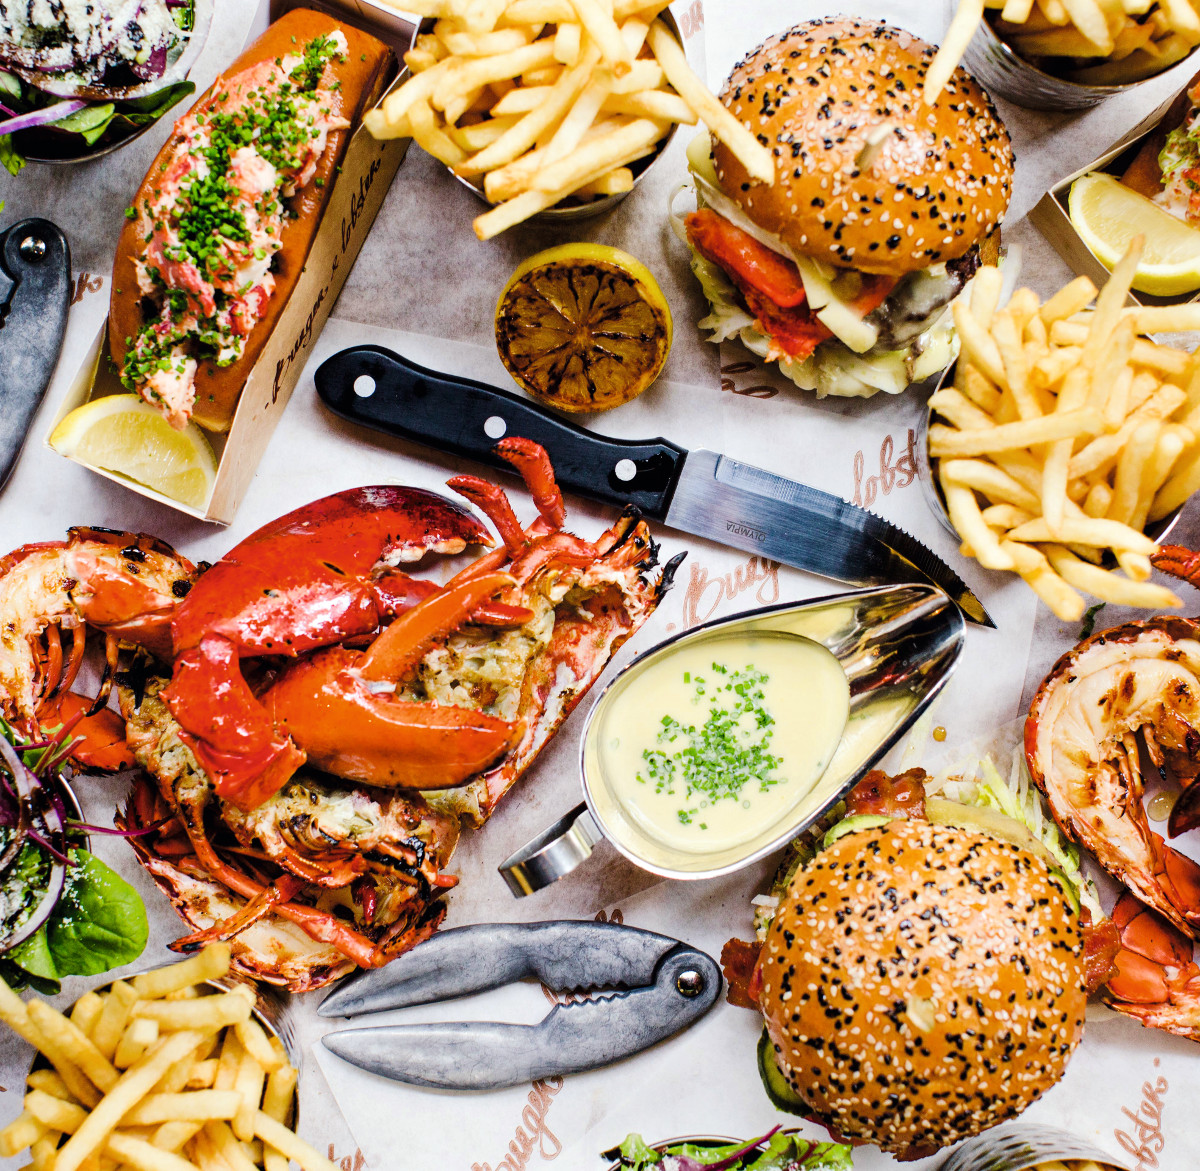 Fries on the side at Burger and Lobster, as reproduced in The World is Your Burger